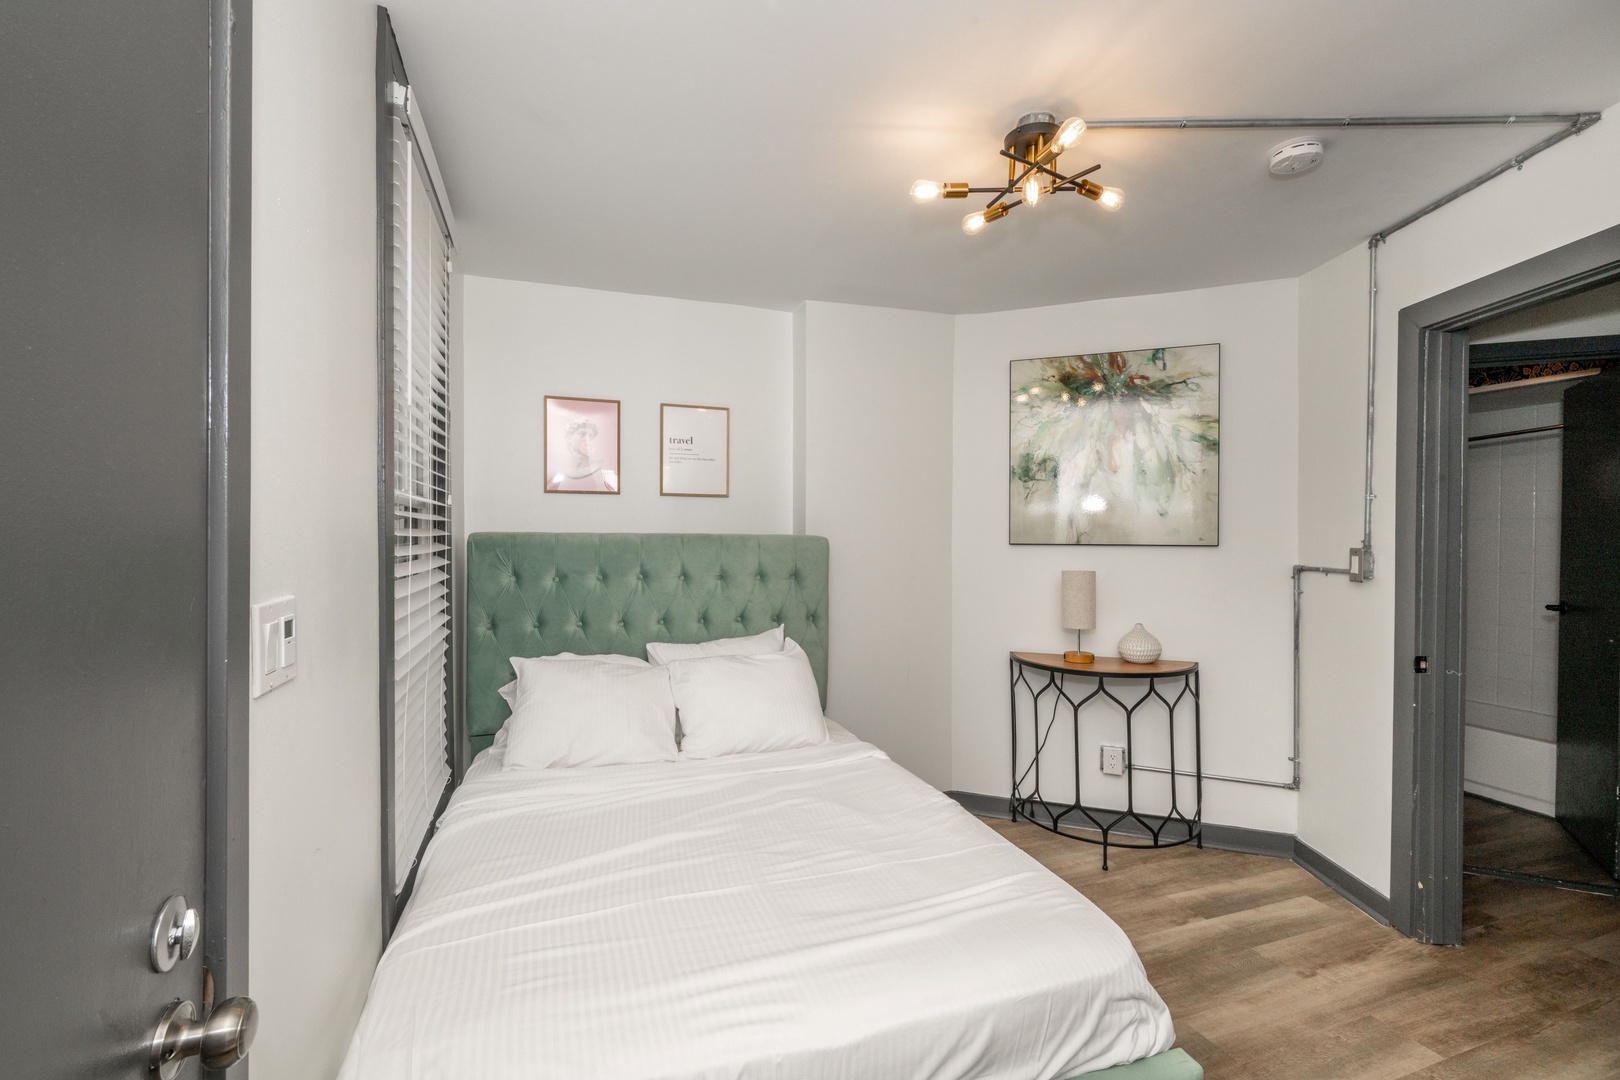 The final bedroom sanctuary on the 1st floor offers a plush full-size bed